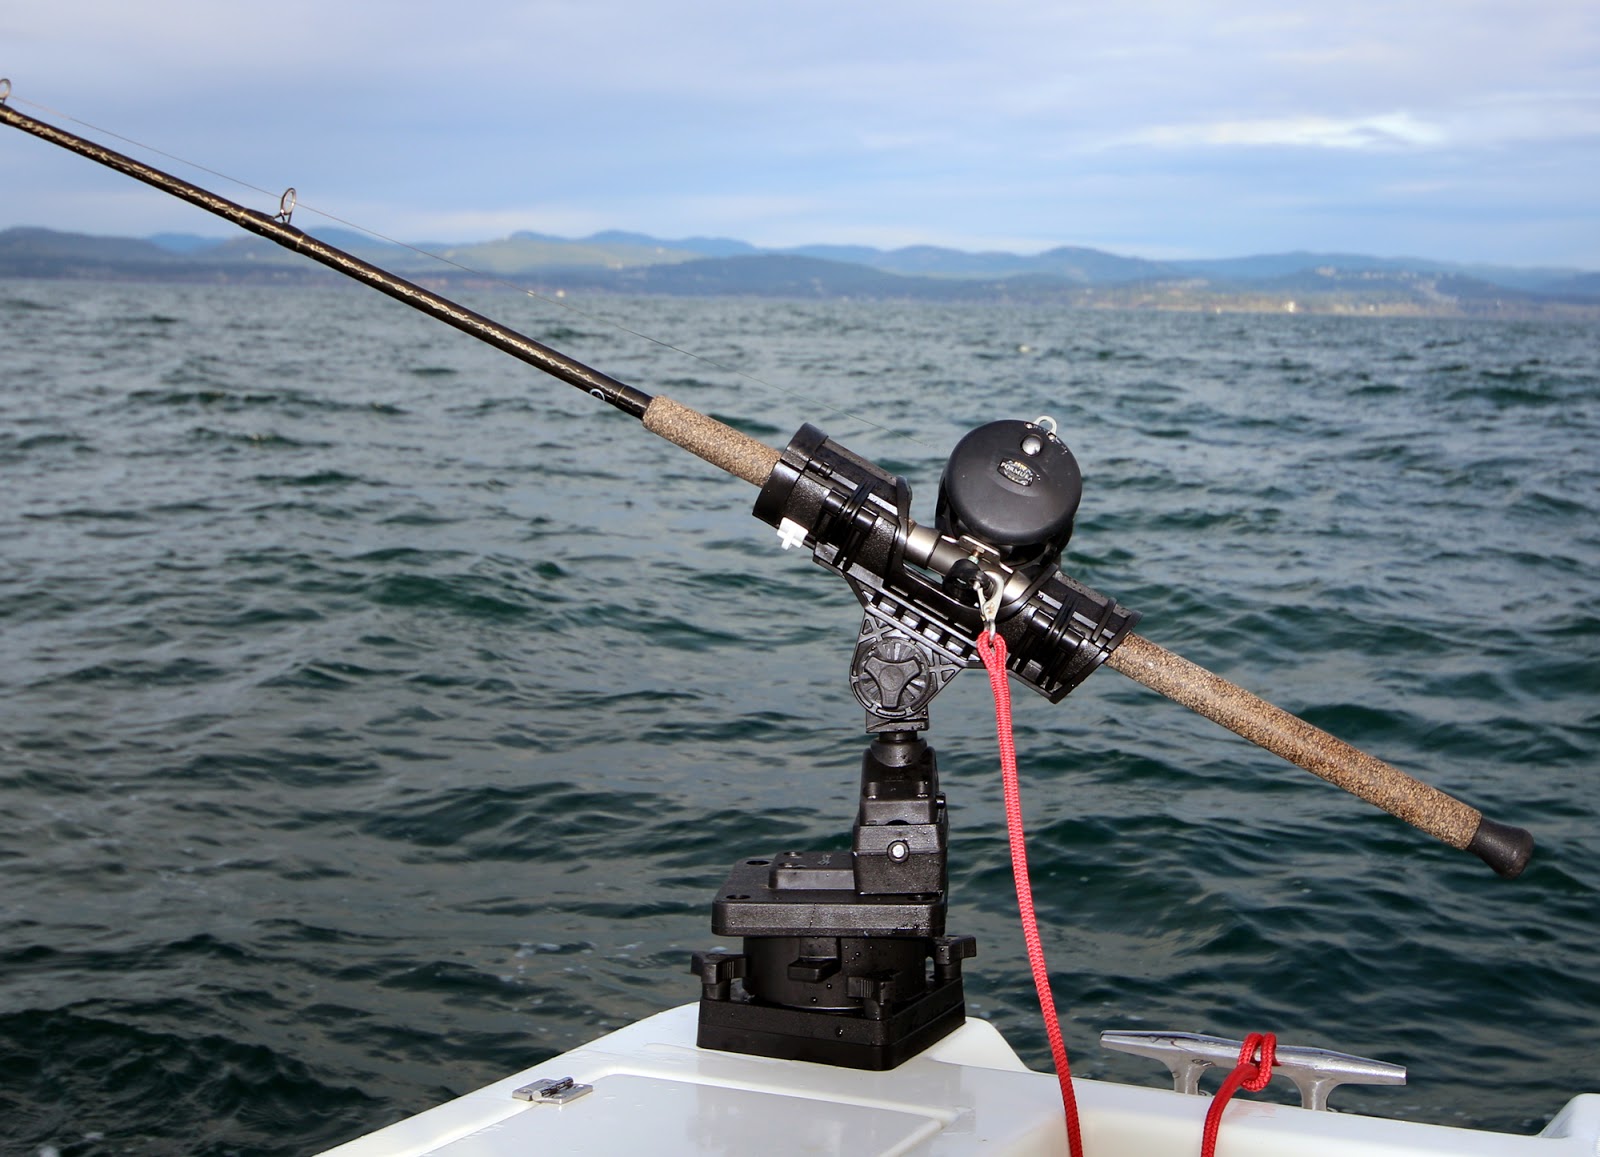 Scotty Fishing Products: No drilling, no problem! - Scotty Stick-On /  Clamp-On Mounts have got you covered!